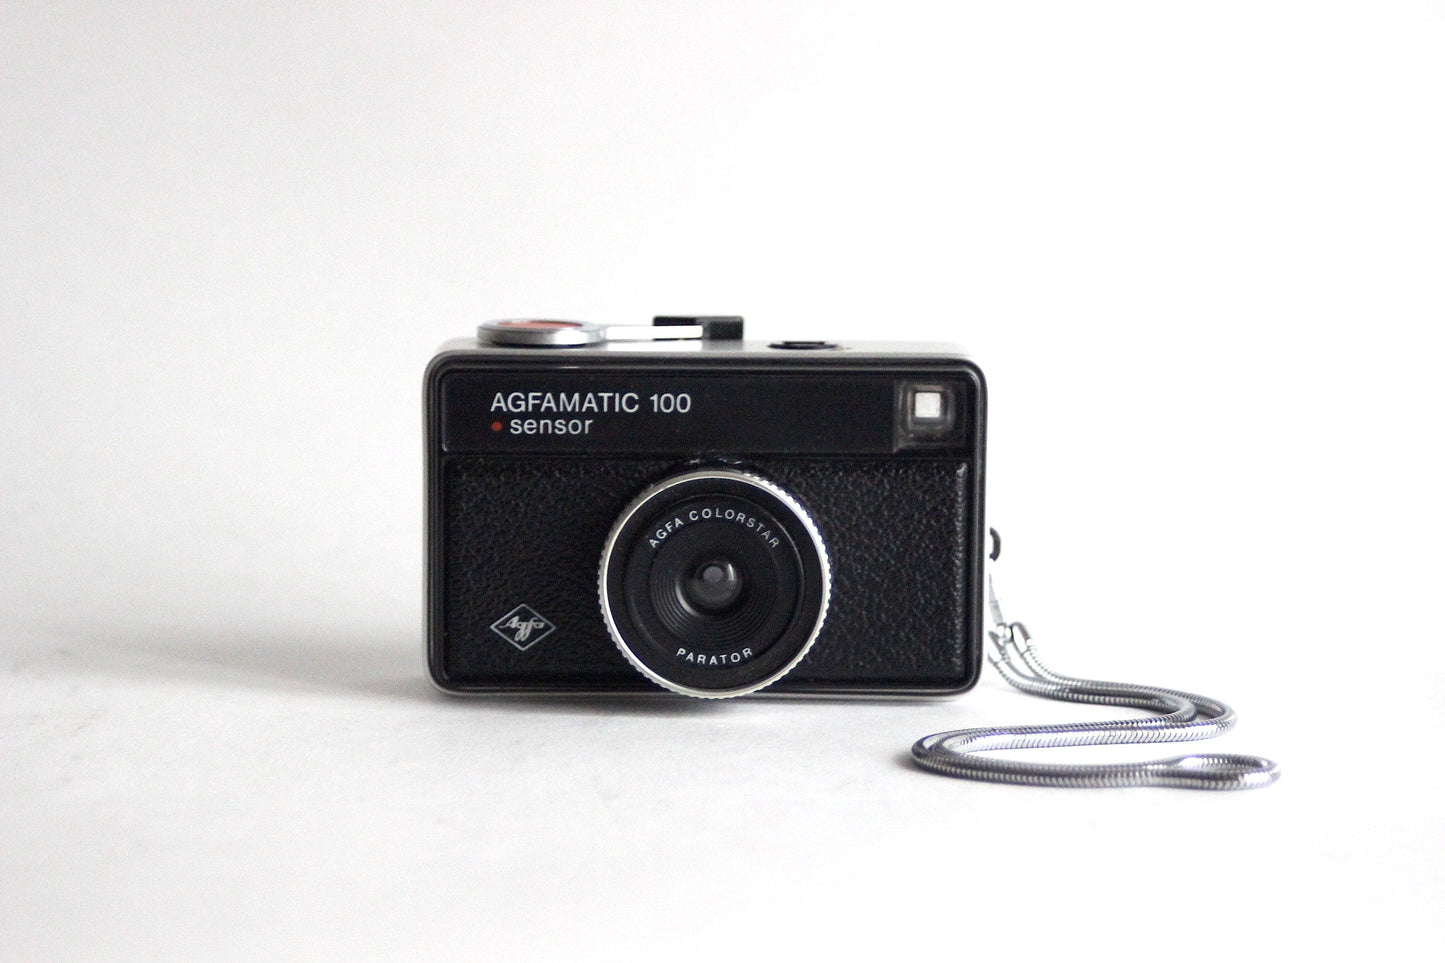 Limited edition AGFA Agfamatic Sensor 100 AIGNER edition with leather case.